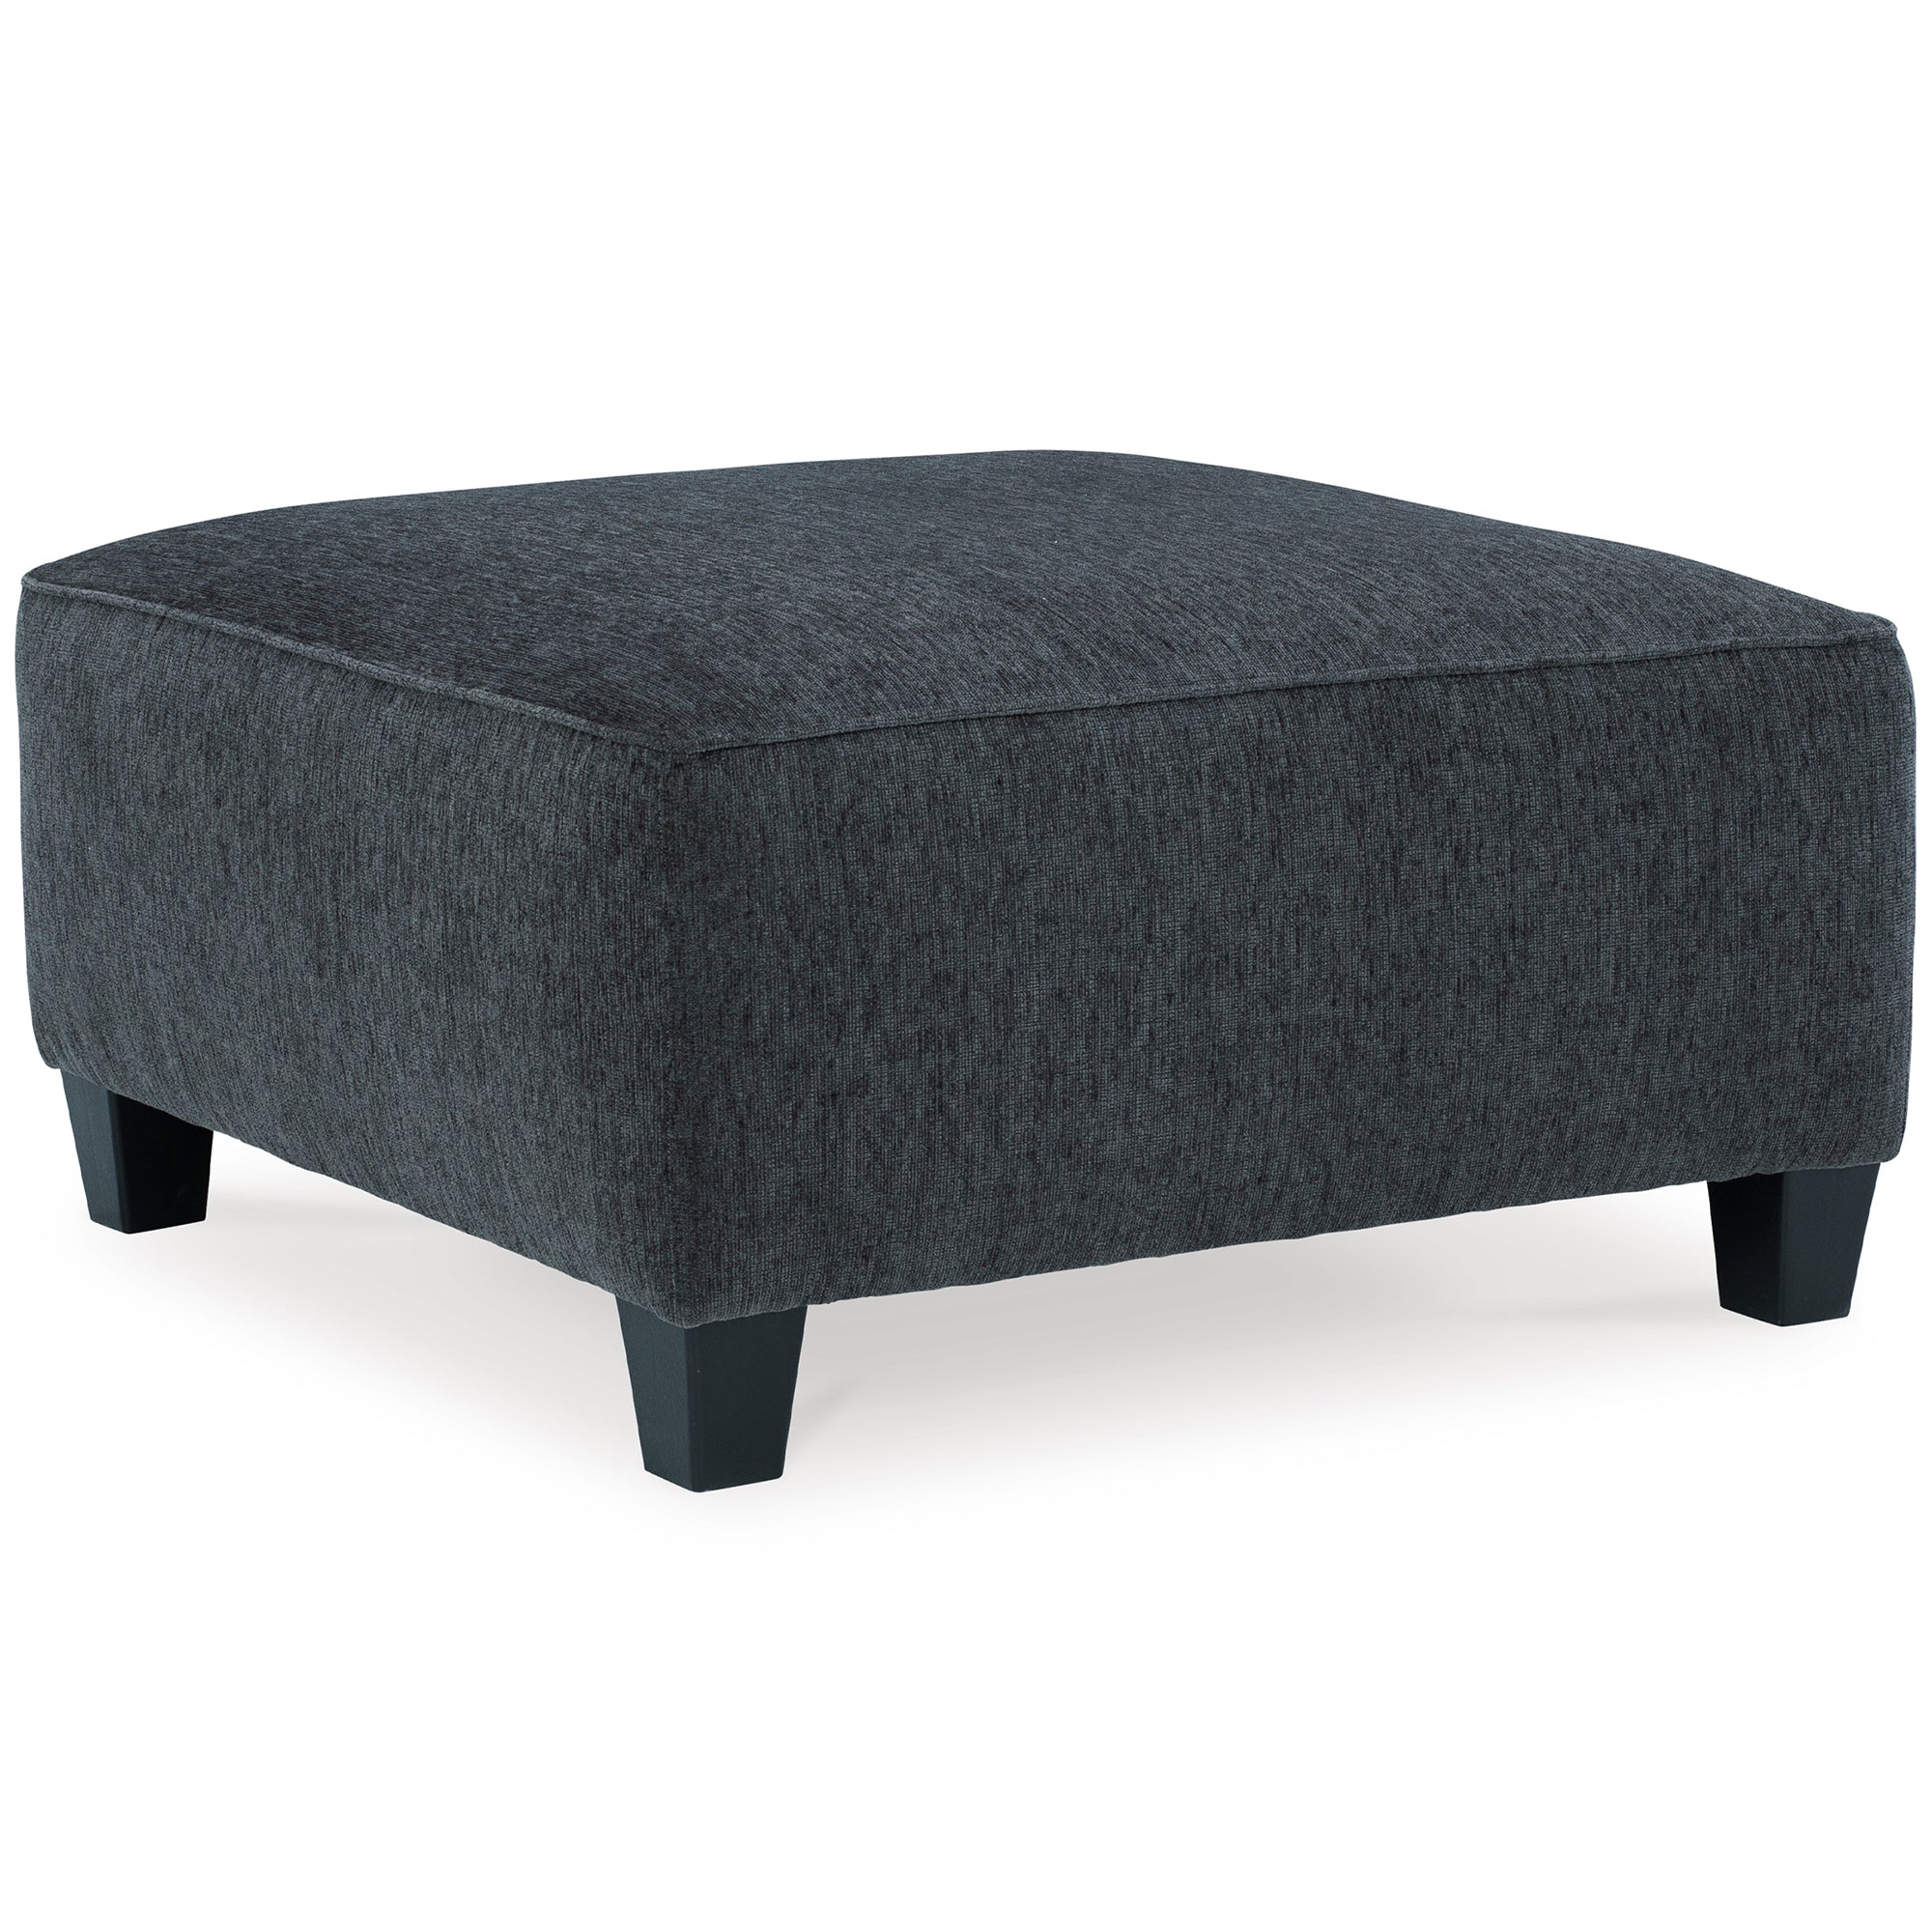 Abinger Oversized Accent Ottoman in Smoke Color